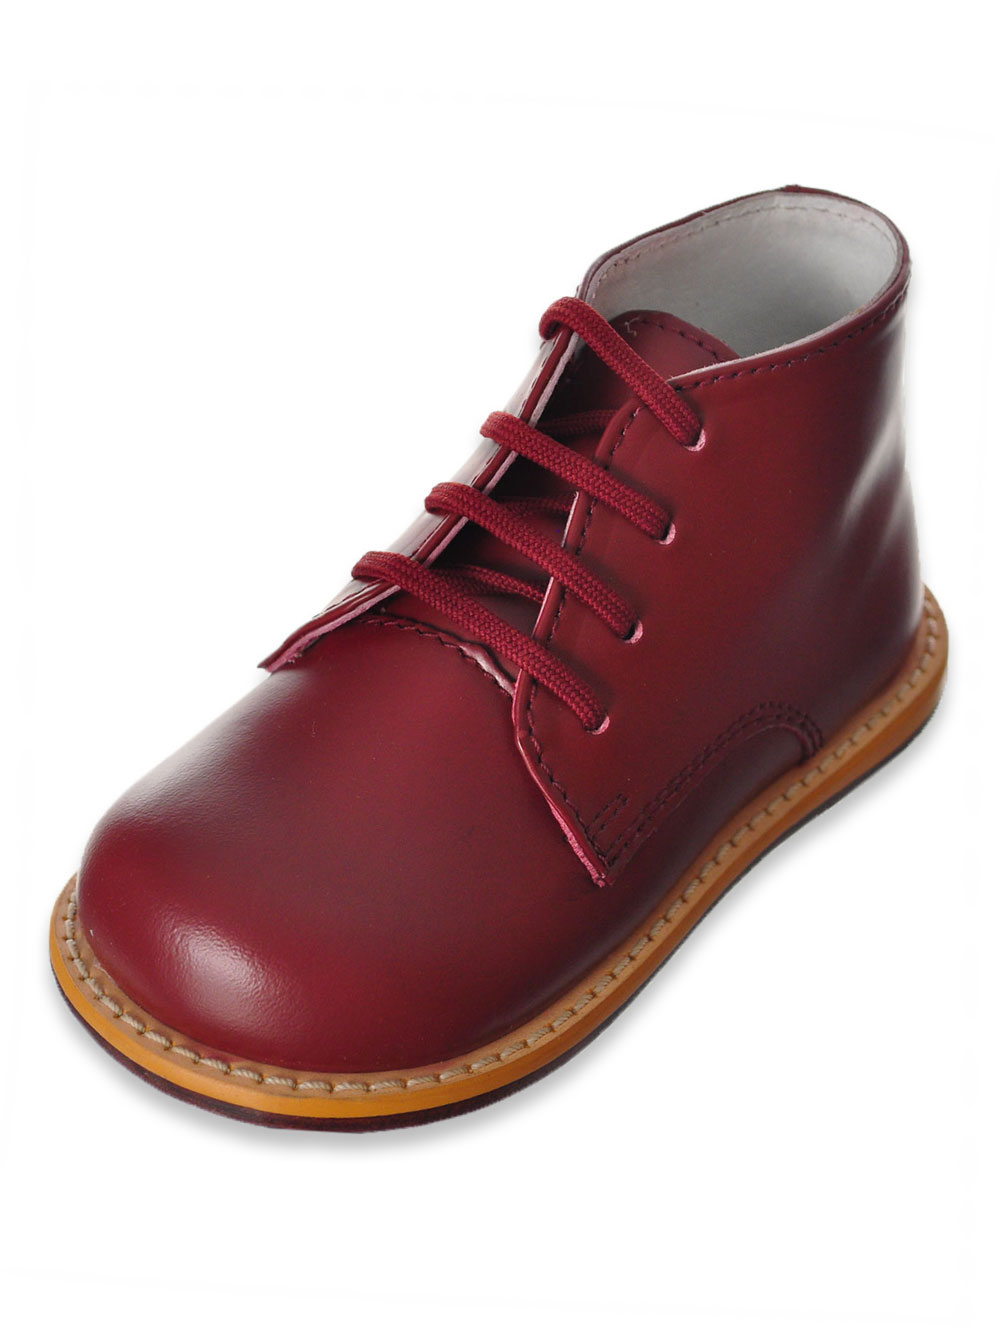 burgundy and white dress shoes